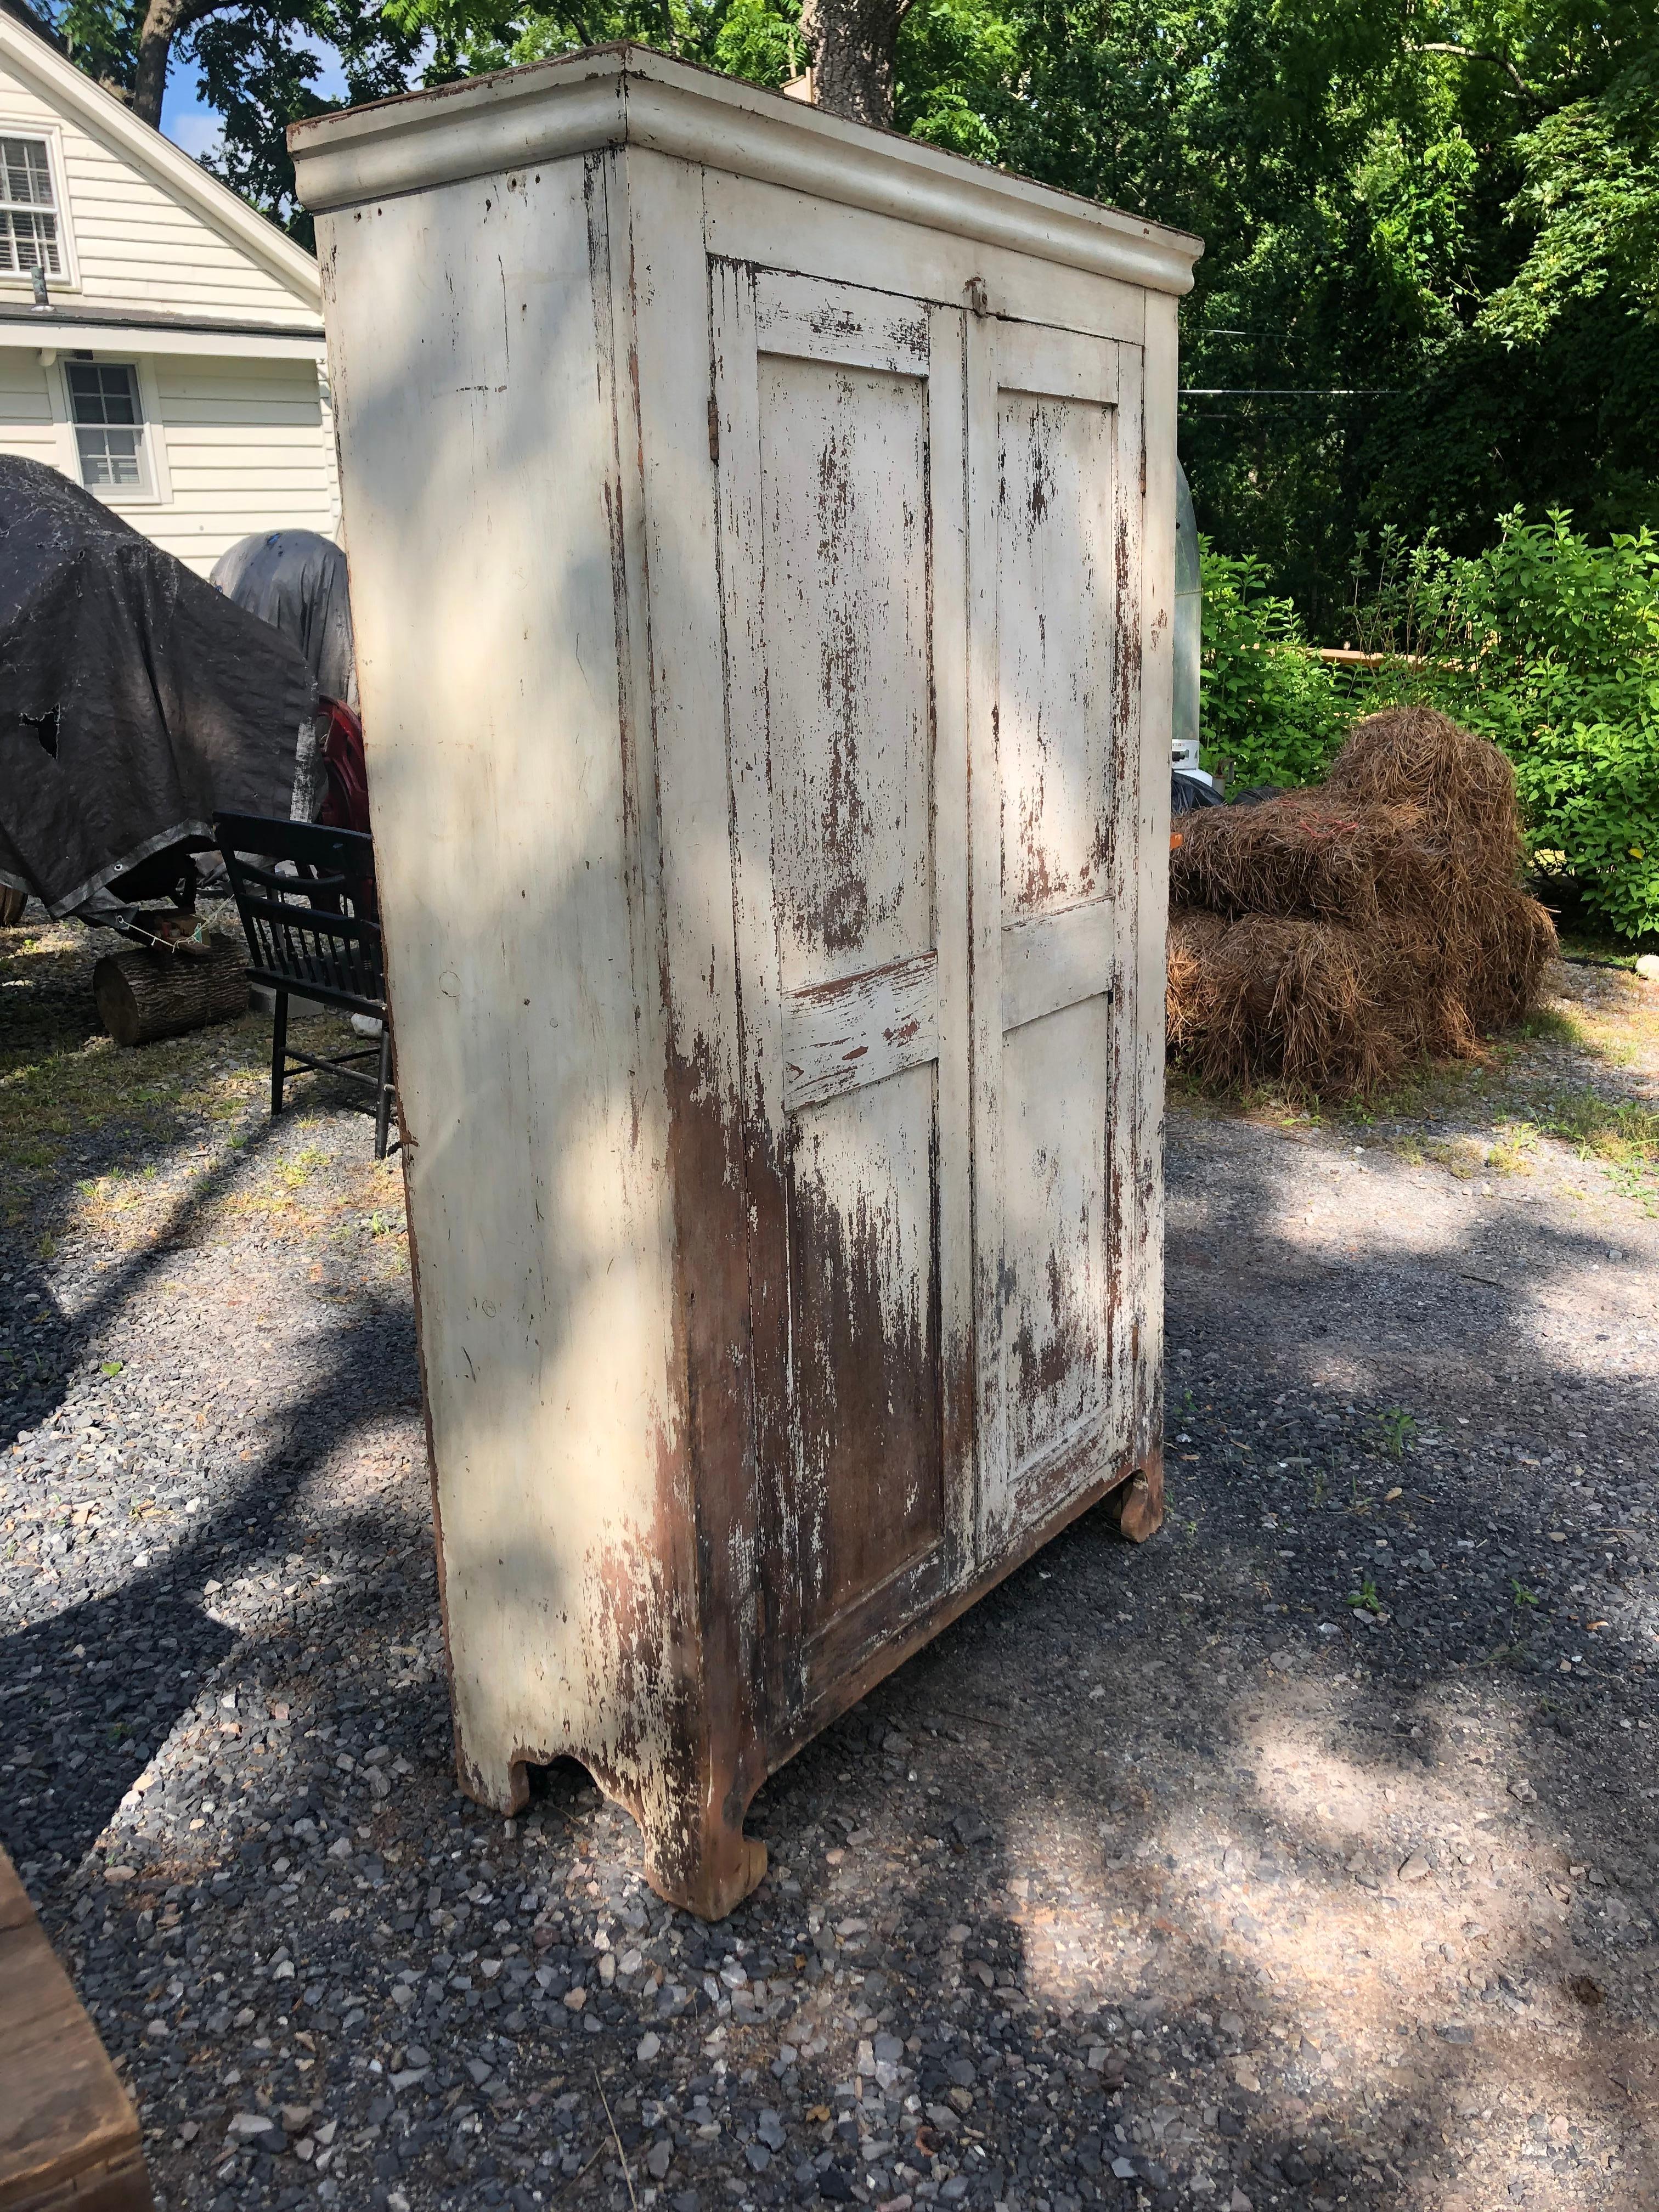 A wonderful painted and distressed country style Vermont wardrobe armoire having natural wood showing through aged white overcoat. Inside is outfitted with dowel and hooks on one side, more hooks on the other.
If you need closet space with